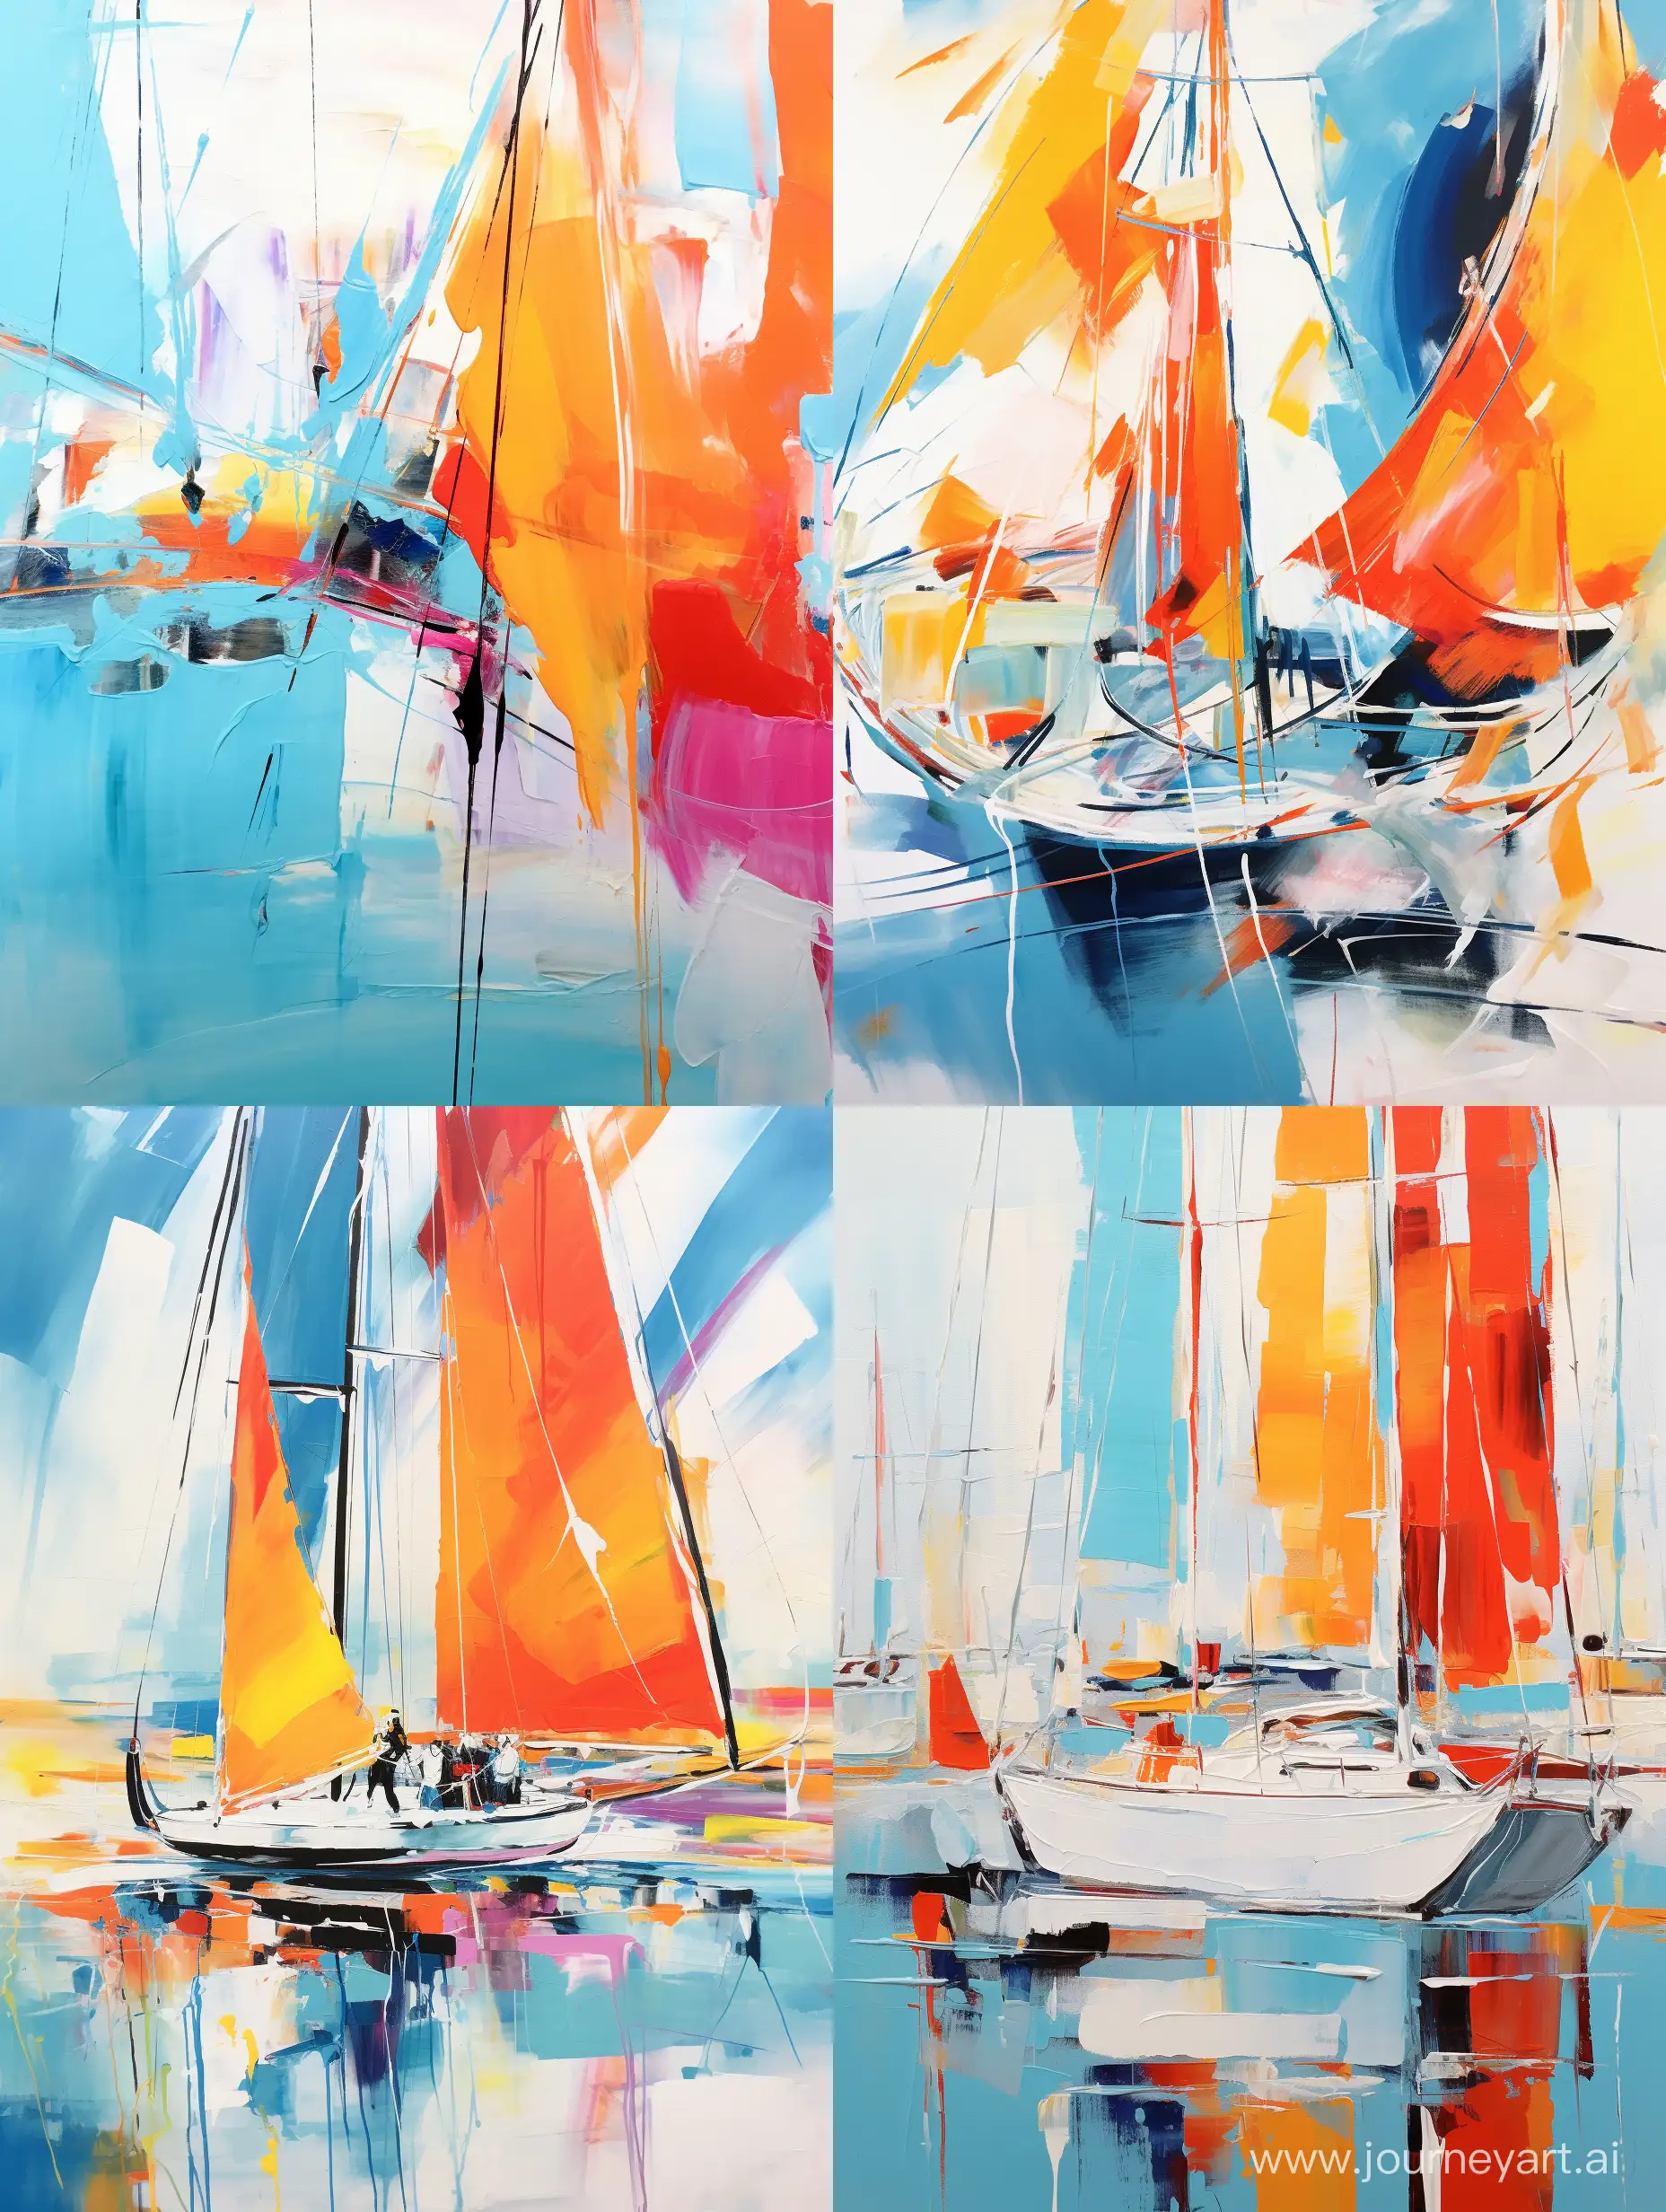 Vibrant-Turquoise-Yachts-in-Marina-Abstract-Art-Inspired-by-Karen-Stamper